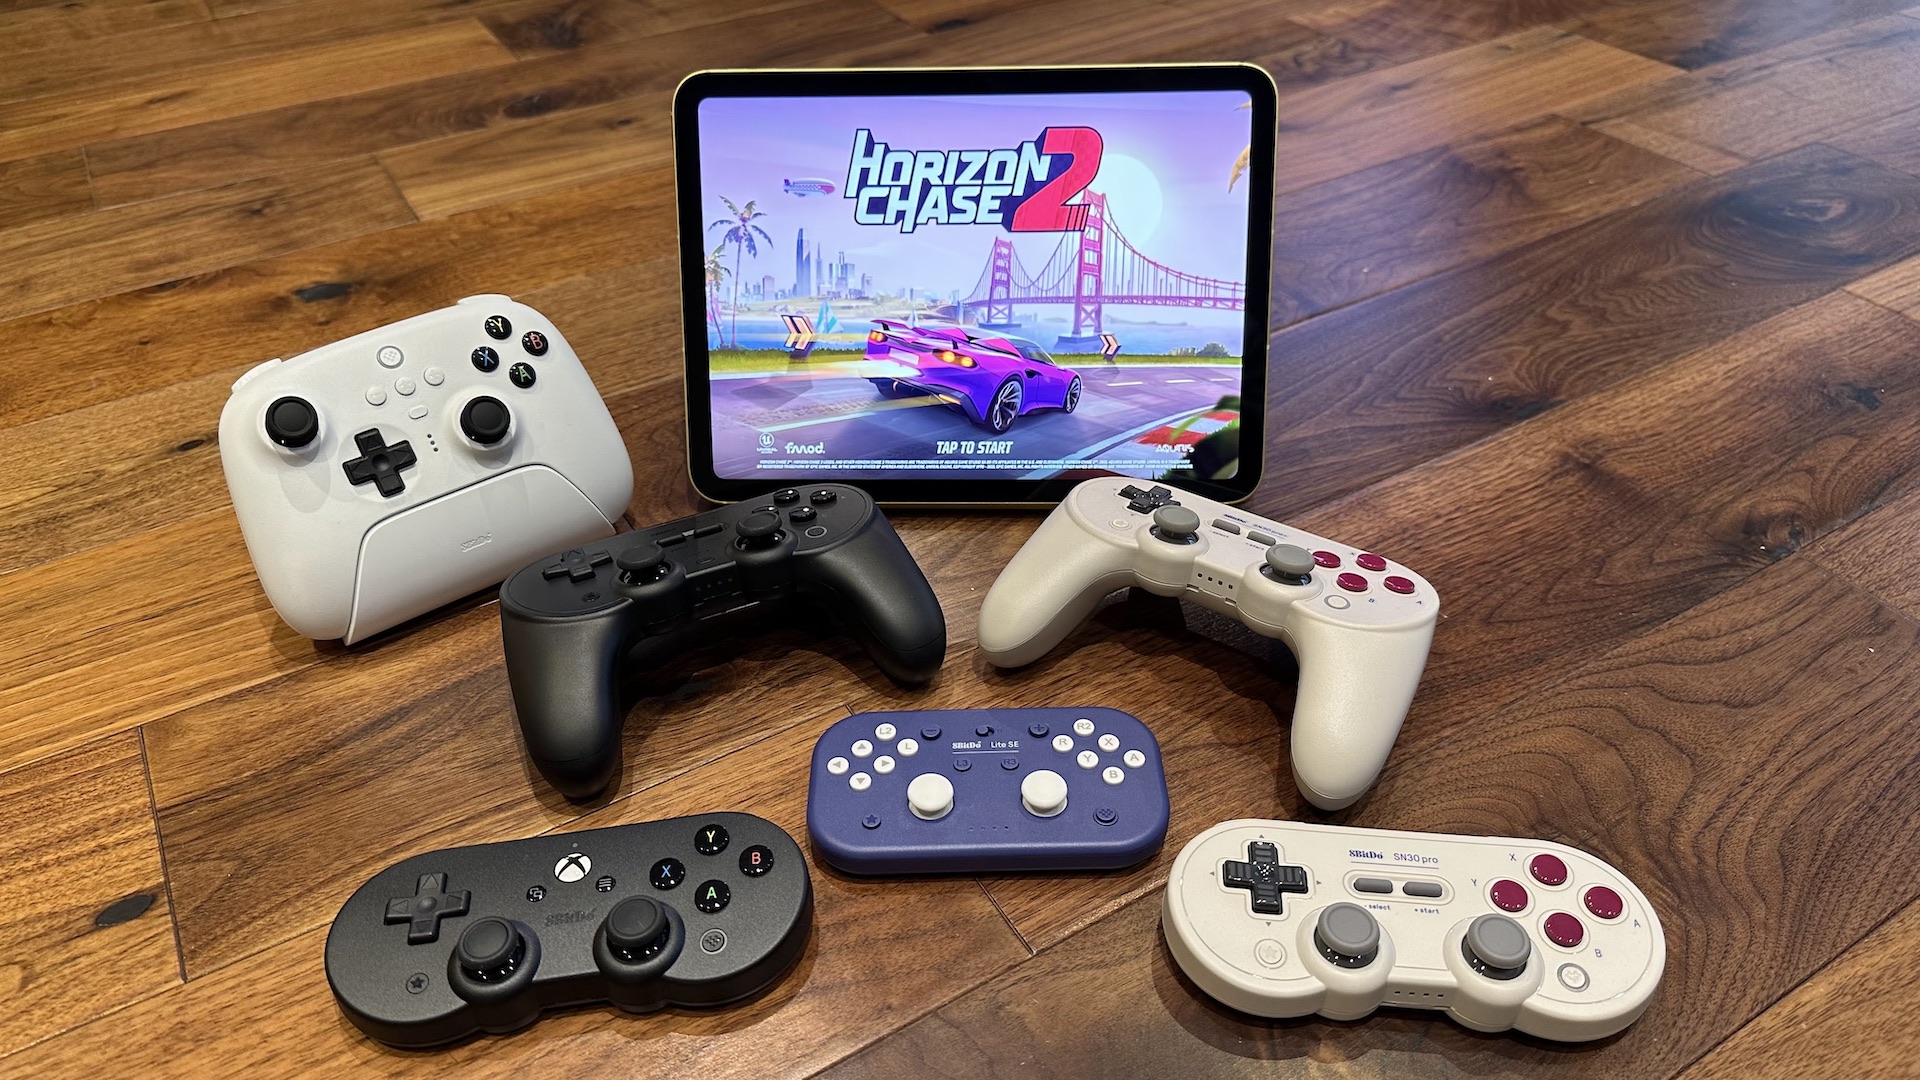 8BitDo Ultimate Software - Apps on Google Play